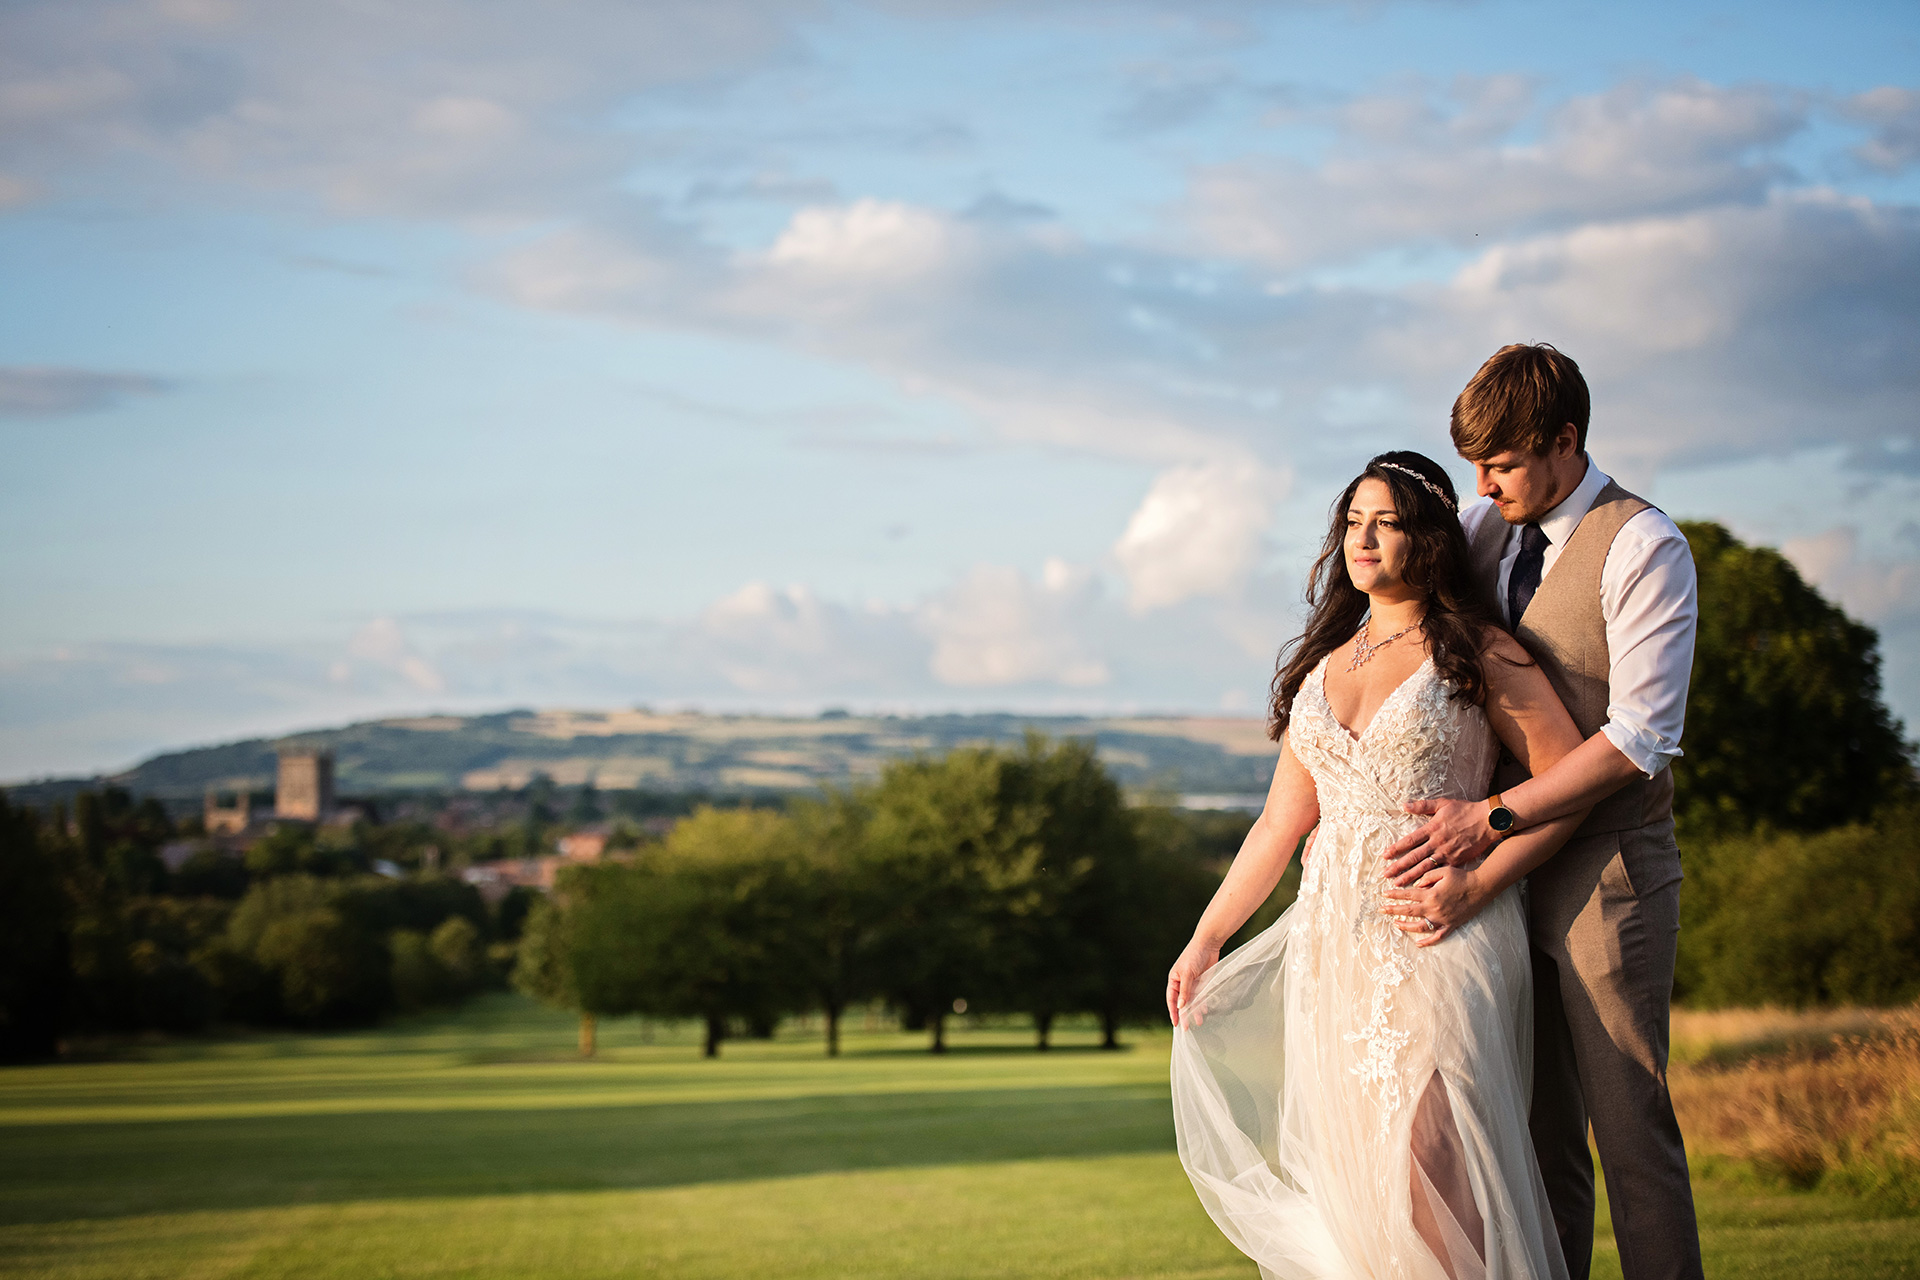 Bride and Groom have a moment during gorgeous golden hour with Tewkesbury Abbey and countryside behind them